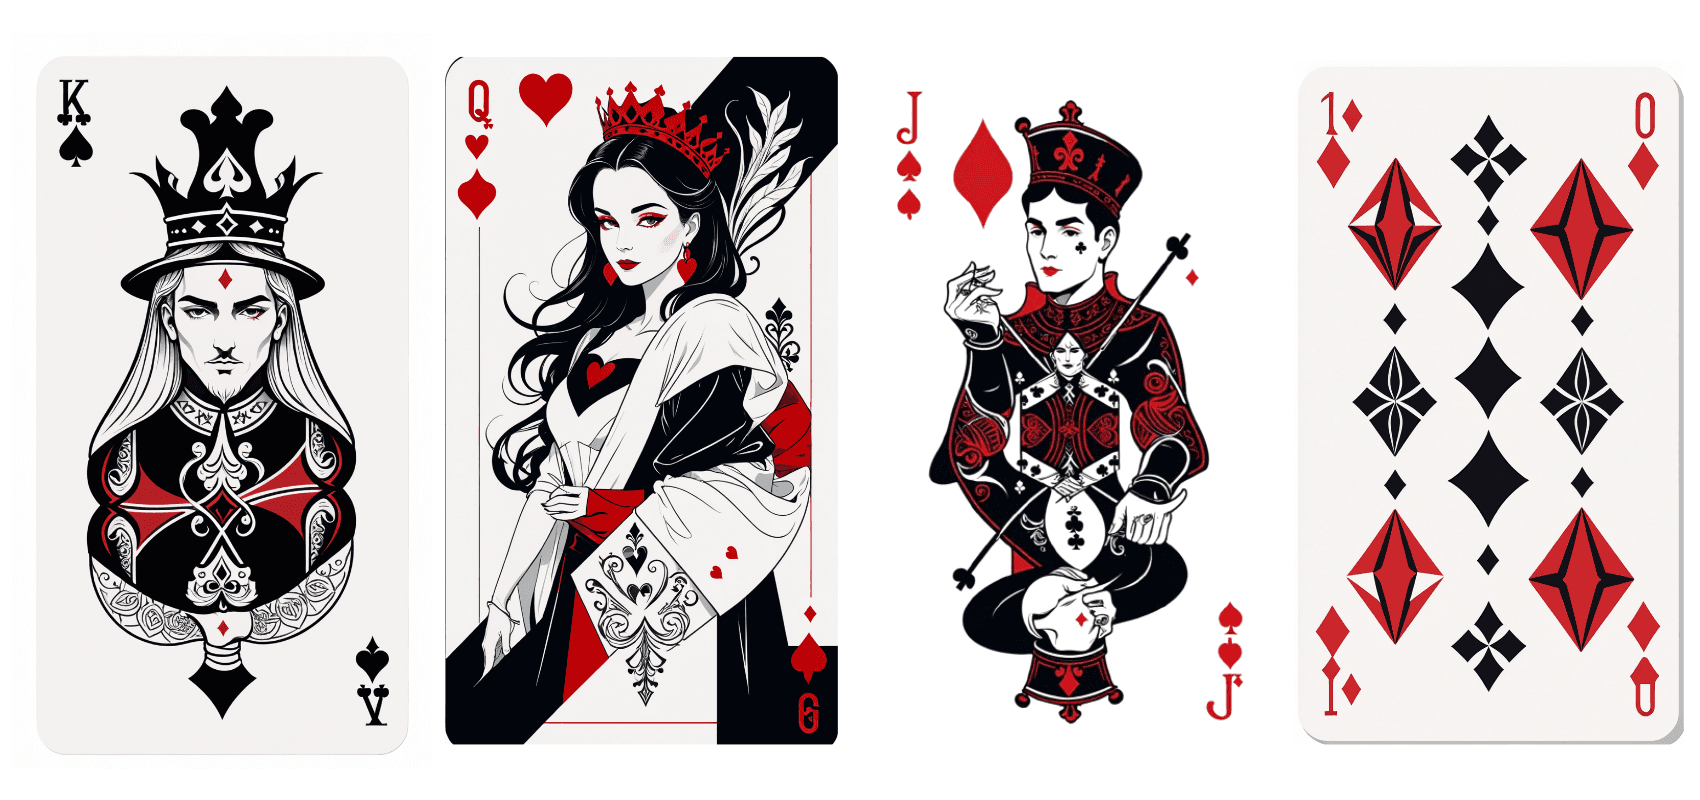 How to Design Your Own Playing Card Deck